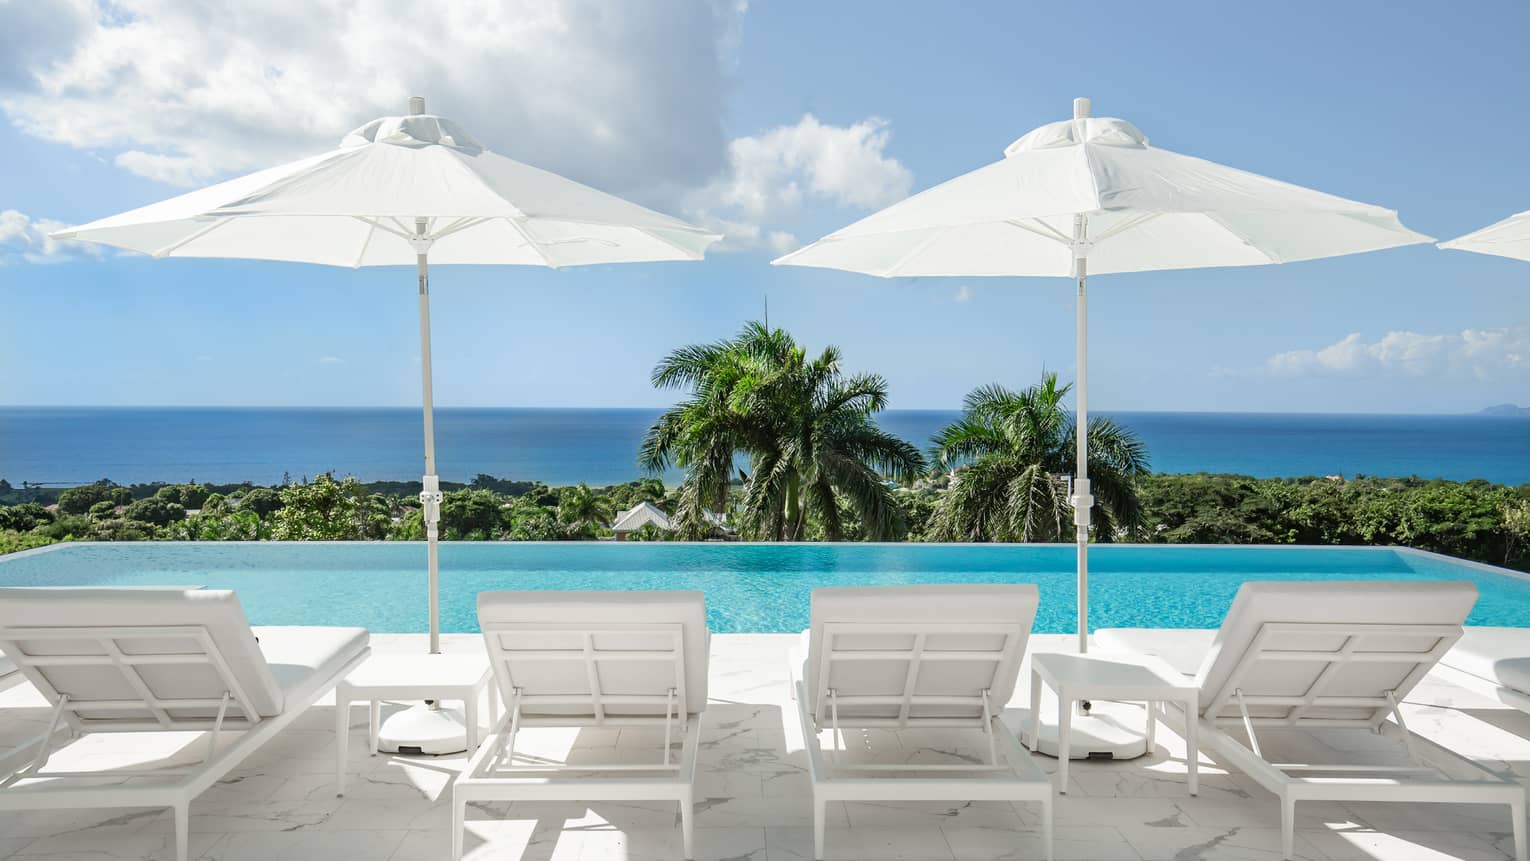 Private pool deck with lounge chairs, umbrellas and sea view